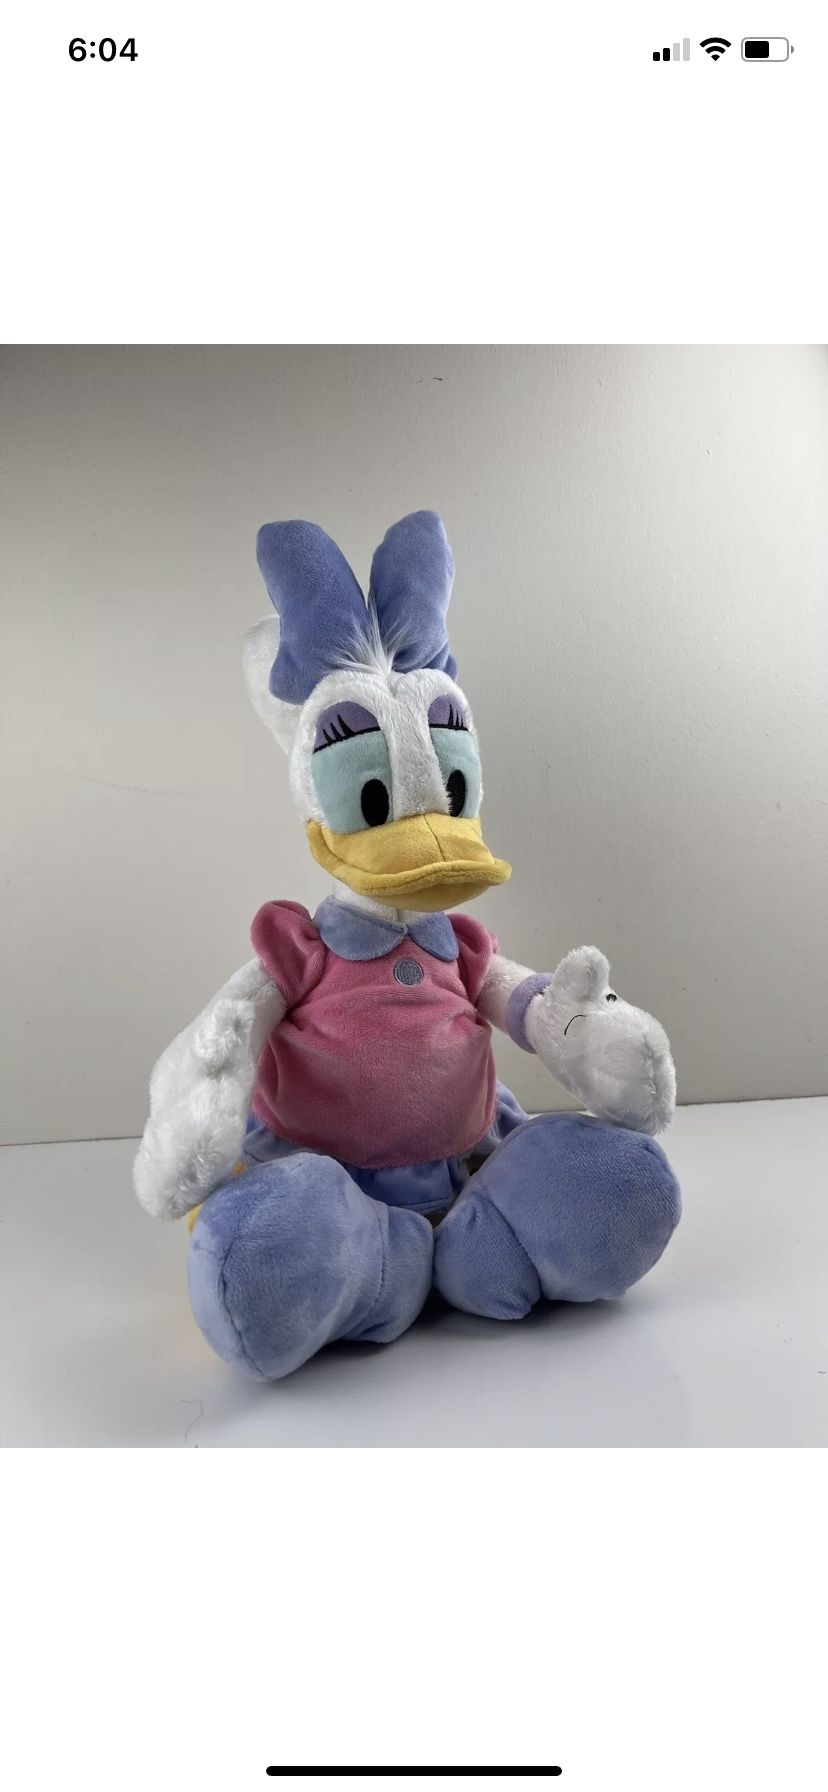 disney store daisy duck plush stuffed animal 18 inches in good clean condition